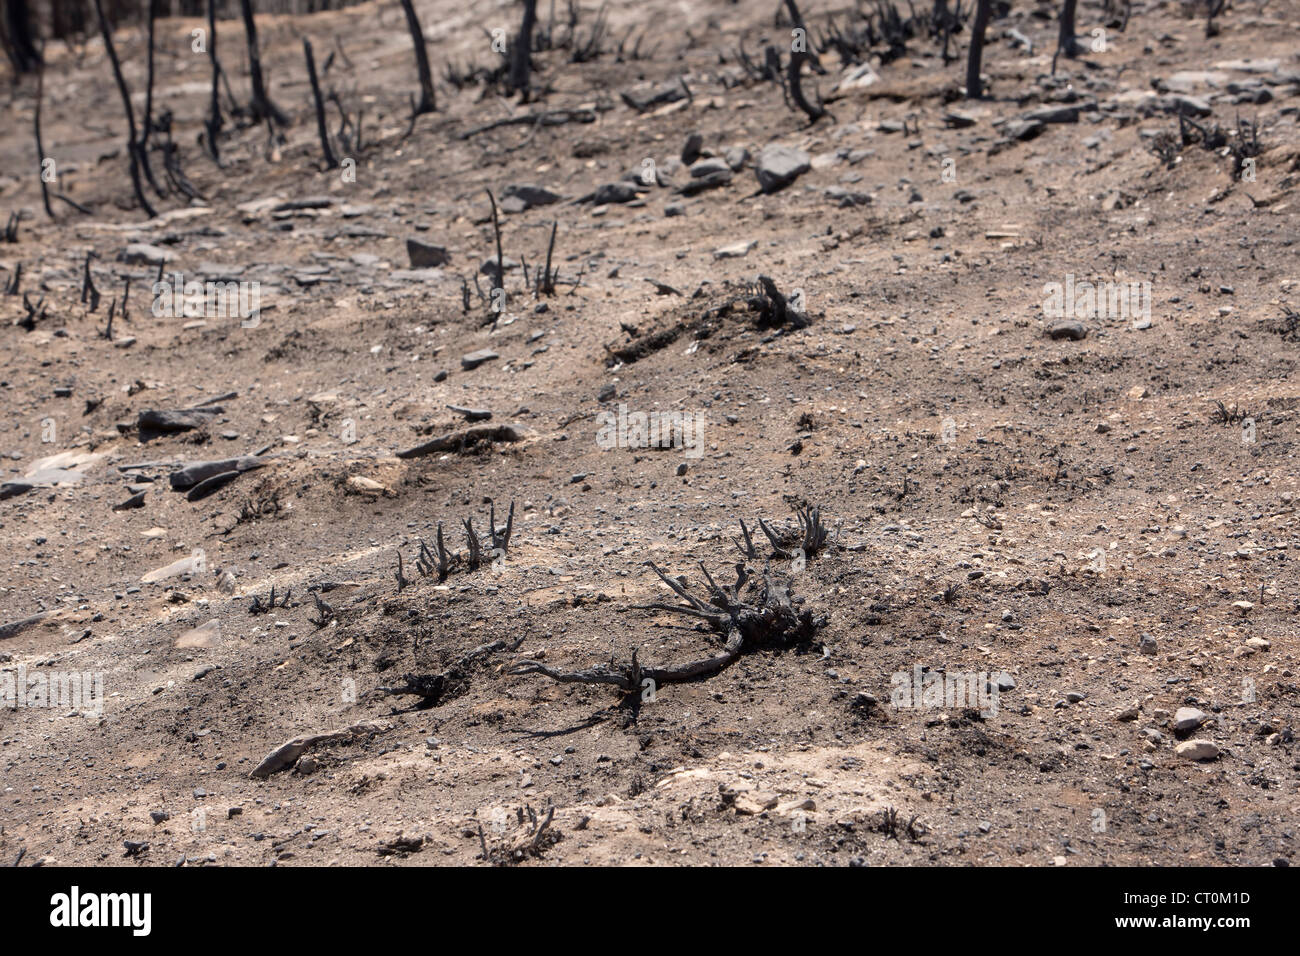 The aftermath of a wildfire which destroyed homes, cabins and buildings in a mountainous area of Utah, USA. Stock Photo